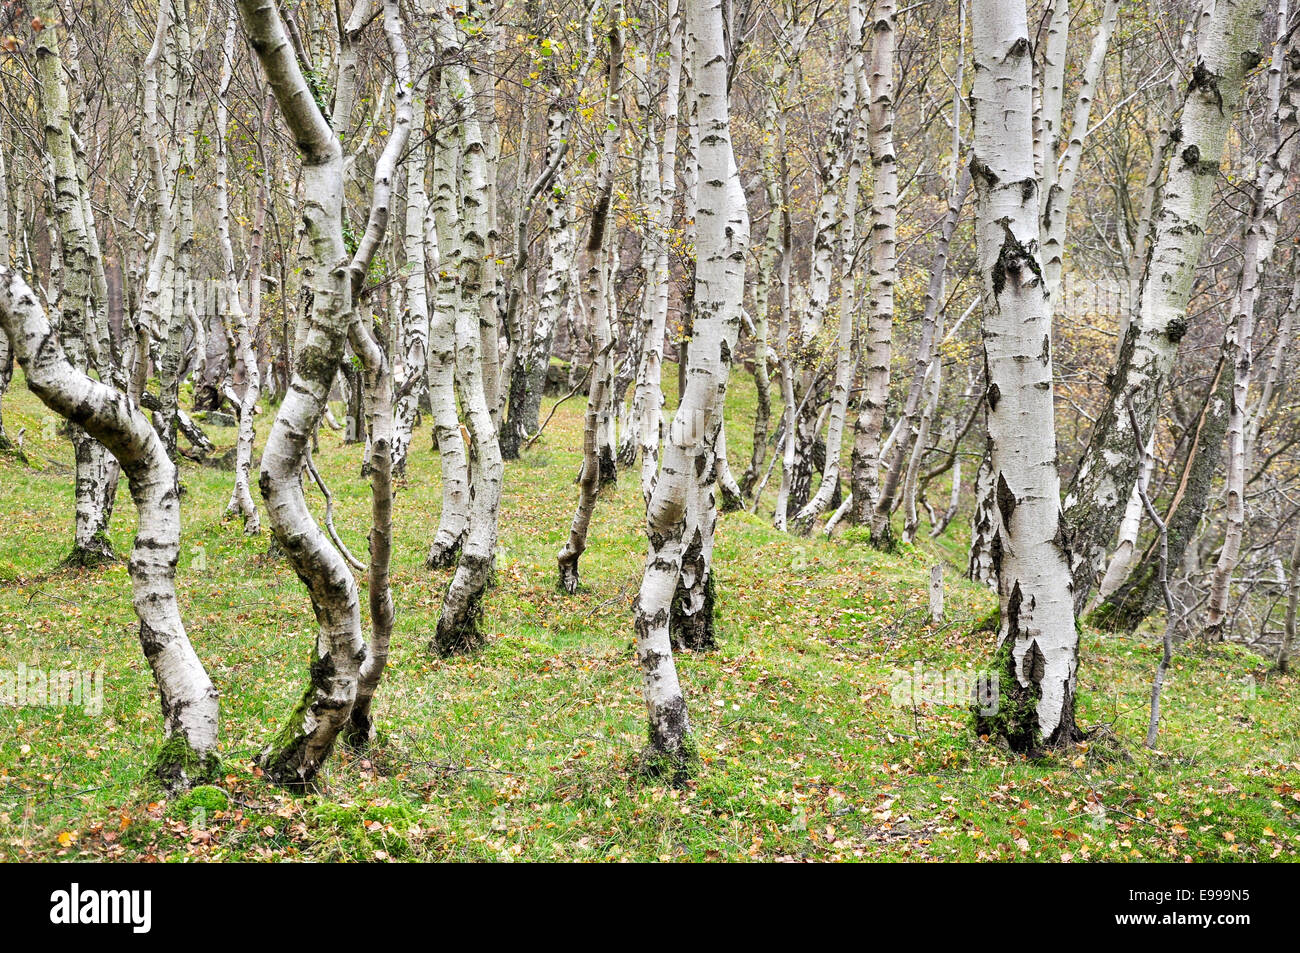 Silver Birch trees with white bark in Bolehill quarry near Hathersage in the Peak District, Derbyshire, England. Stock Photo